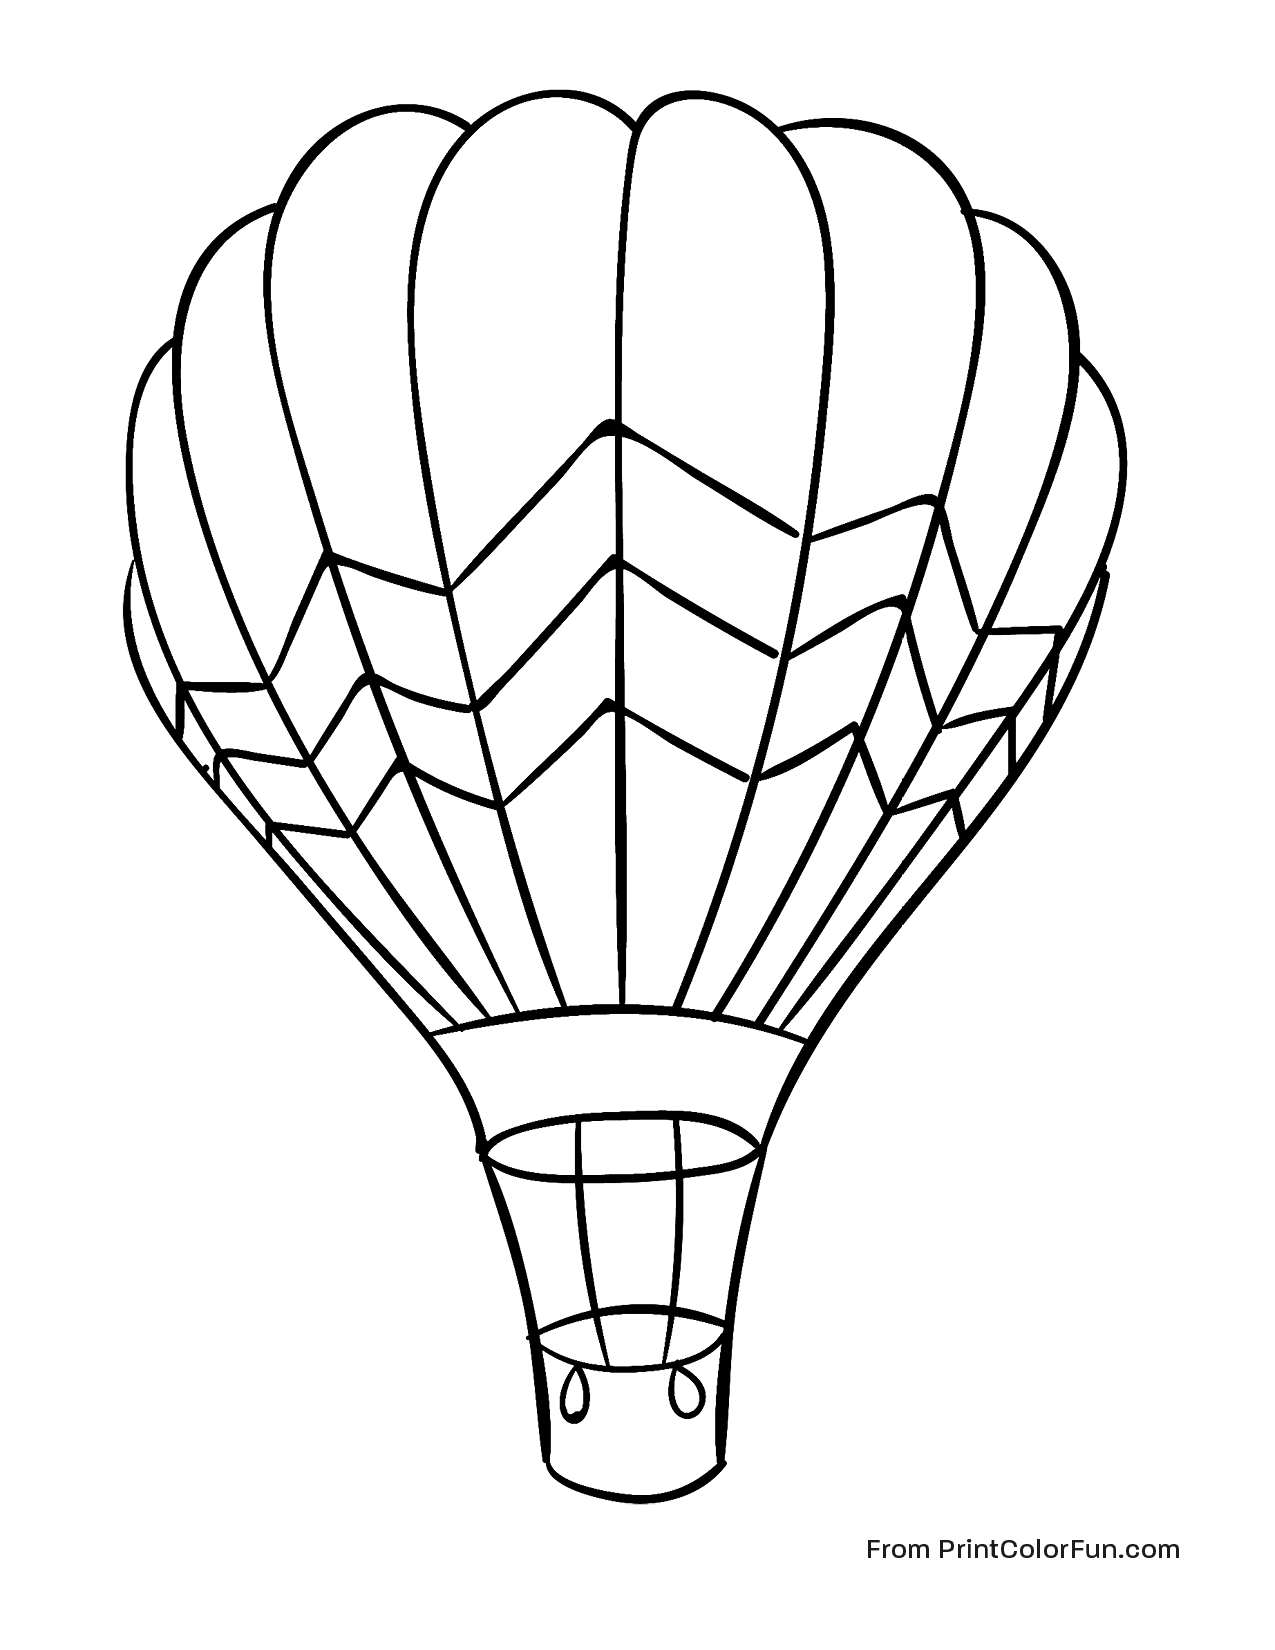 Download Hot air balloon with lines coloring page - Print. Color. Fun!